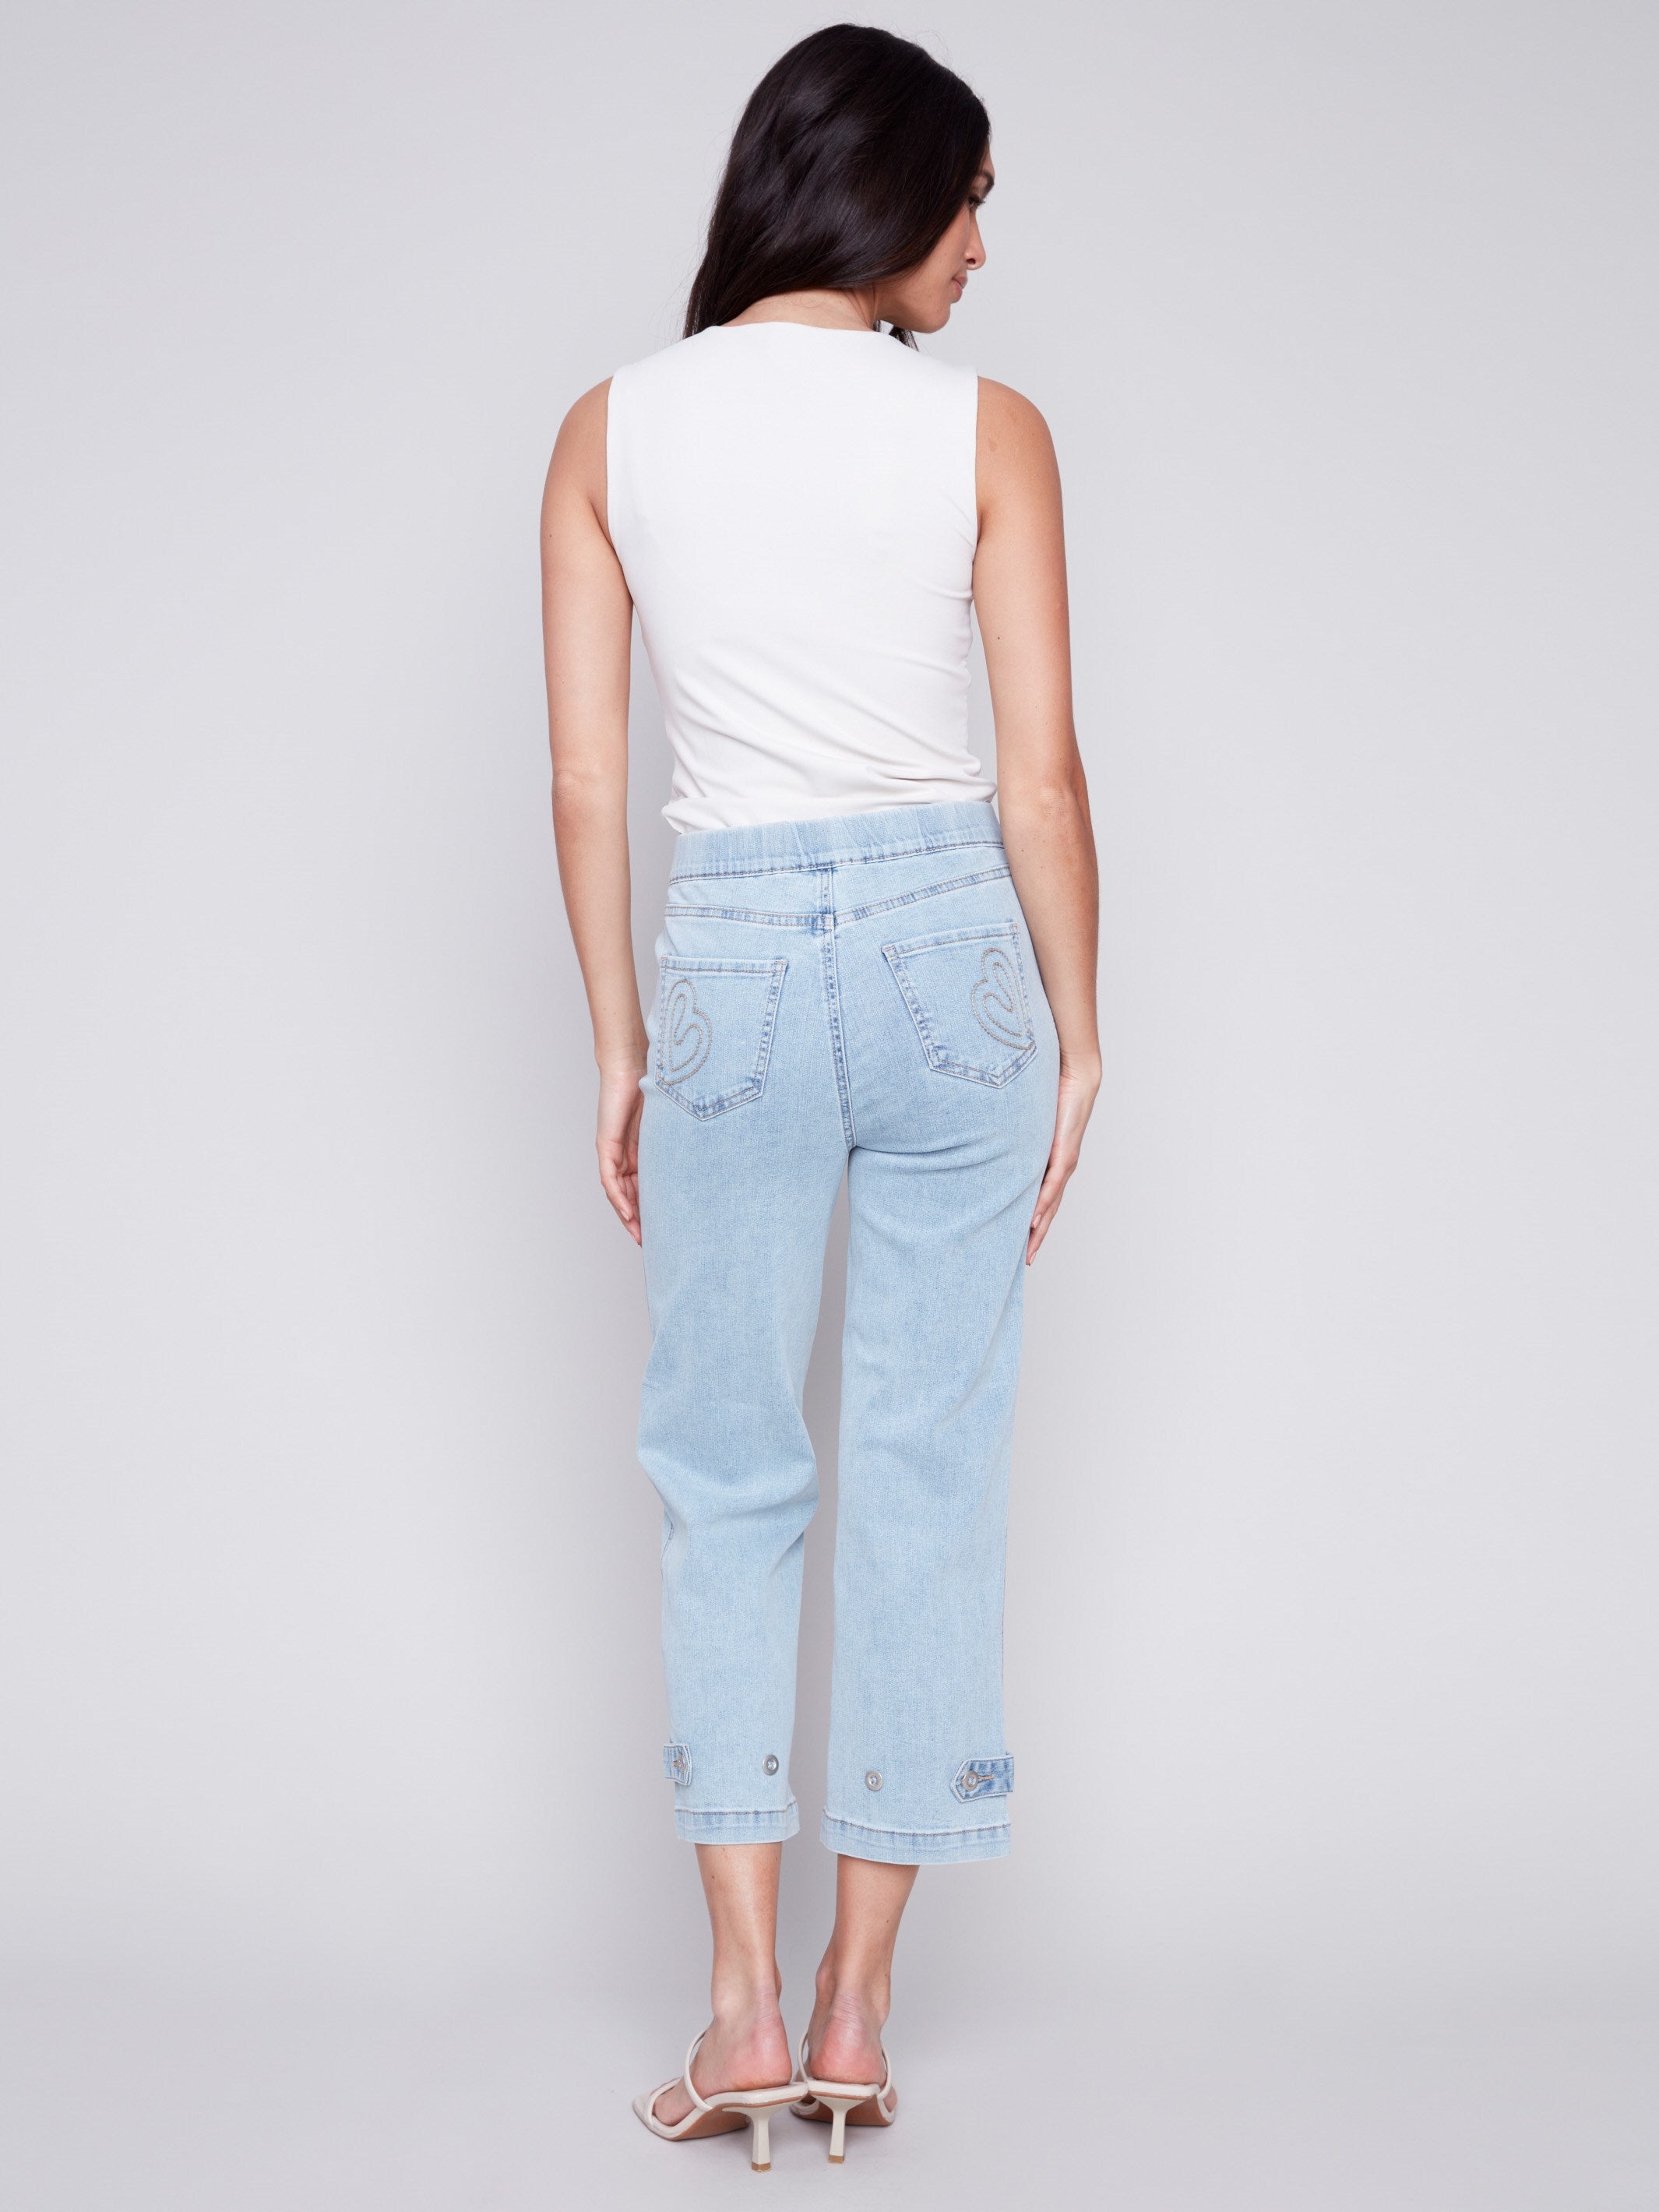 Cropped Pull-On Jeans with Hem Tab - Bleach Blue - Charlie B Collection Canada - Image 4